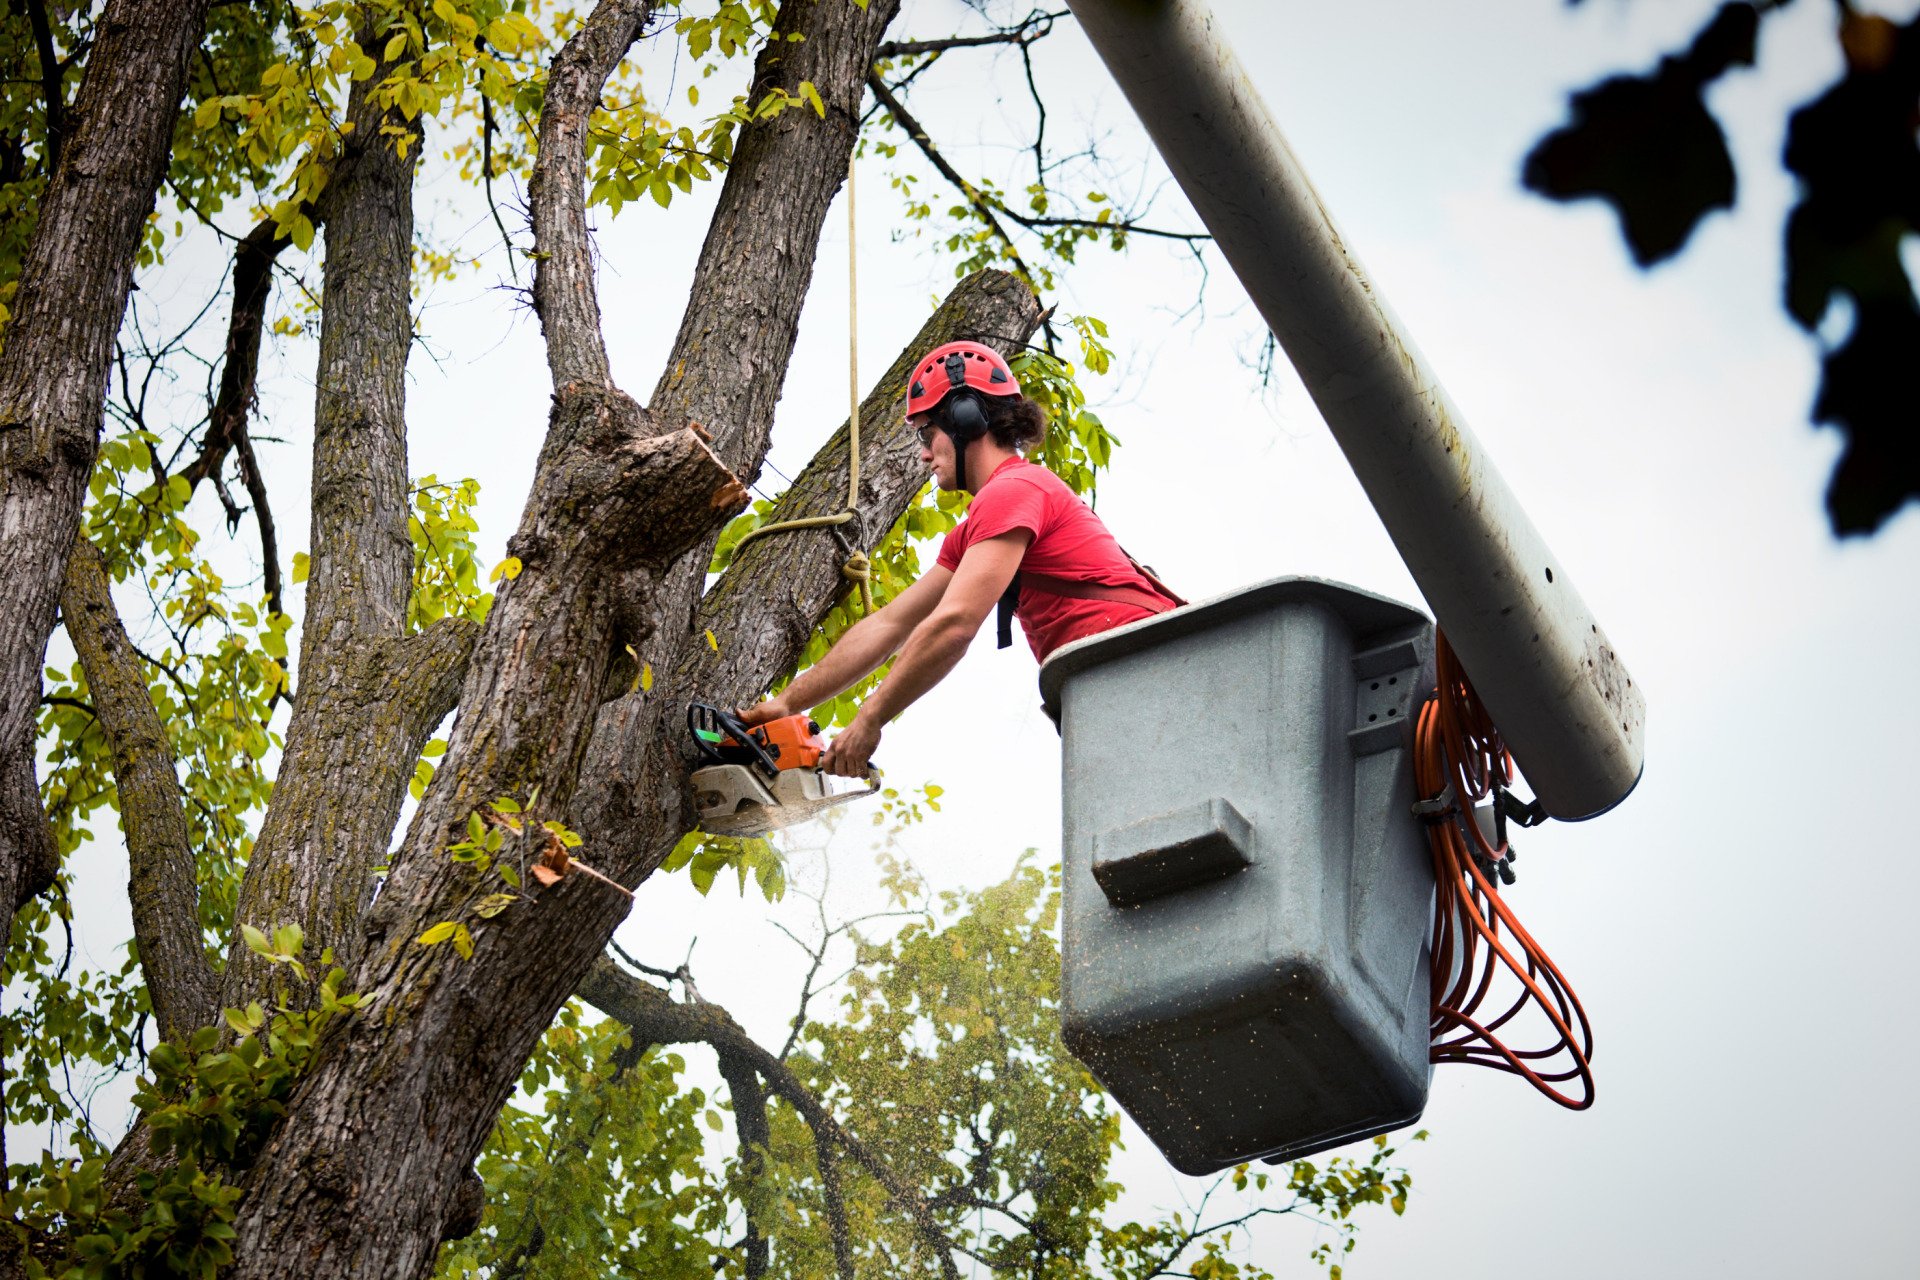 This tree care expert is taking the dead tree limb away from a bucket truck